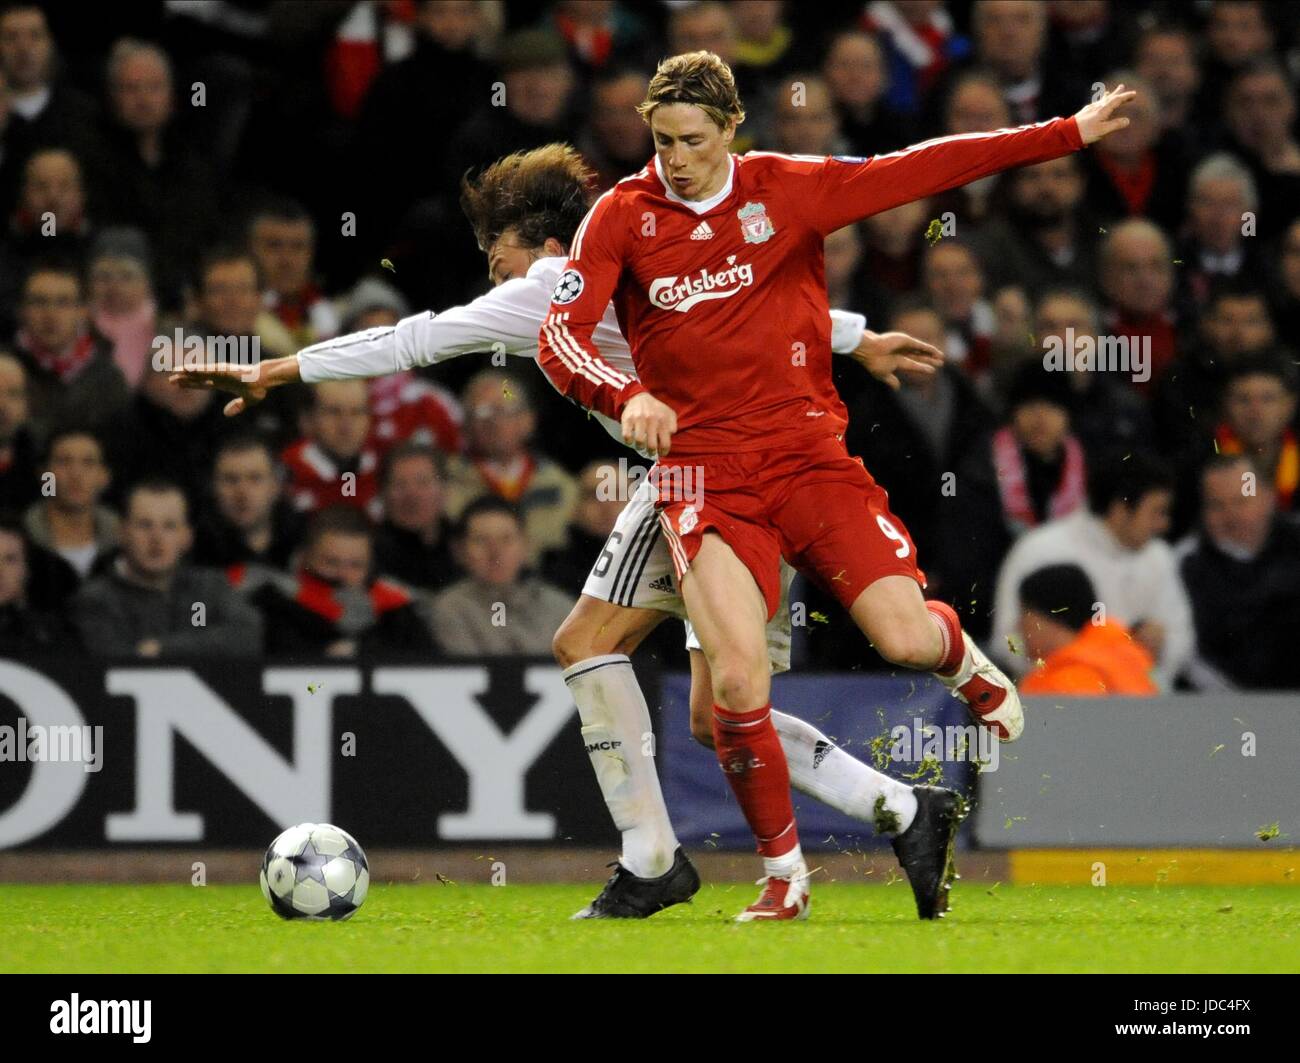 GABRIEL HEINZE FERNANDO TORRES LIVERPOOL V REAL MADRID ANFIELD LIVERPOOL ENGLAND 10 March 2009 Stock Photo